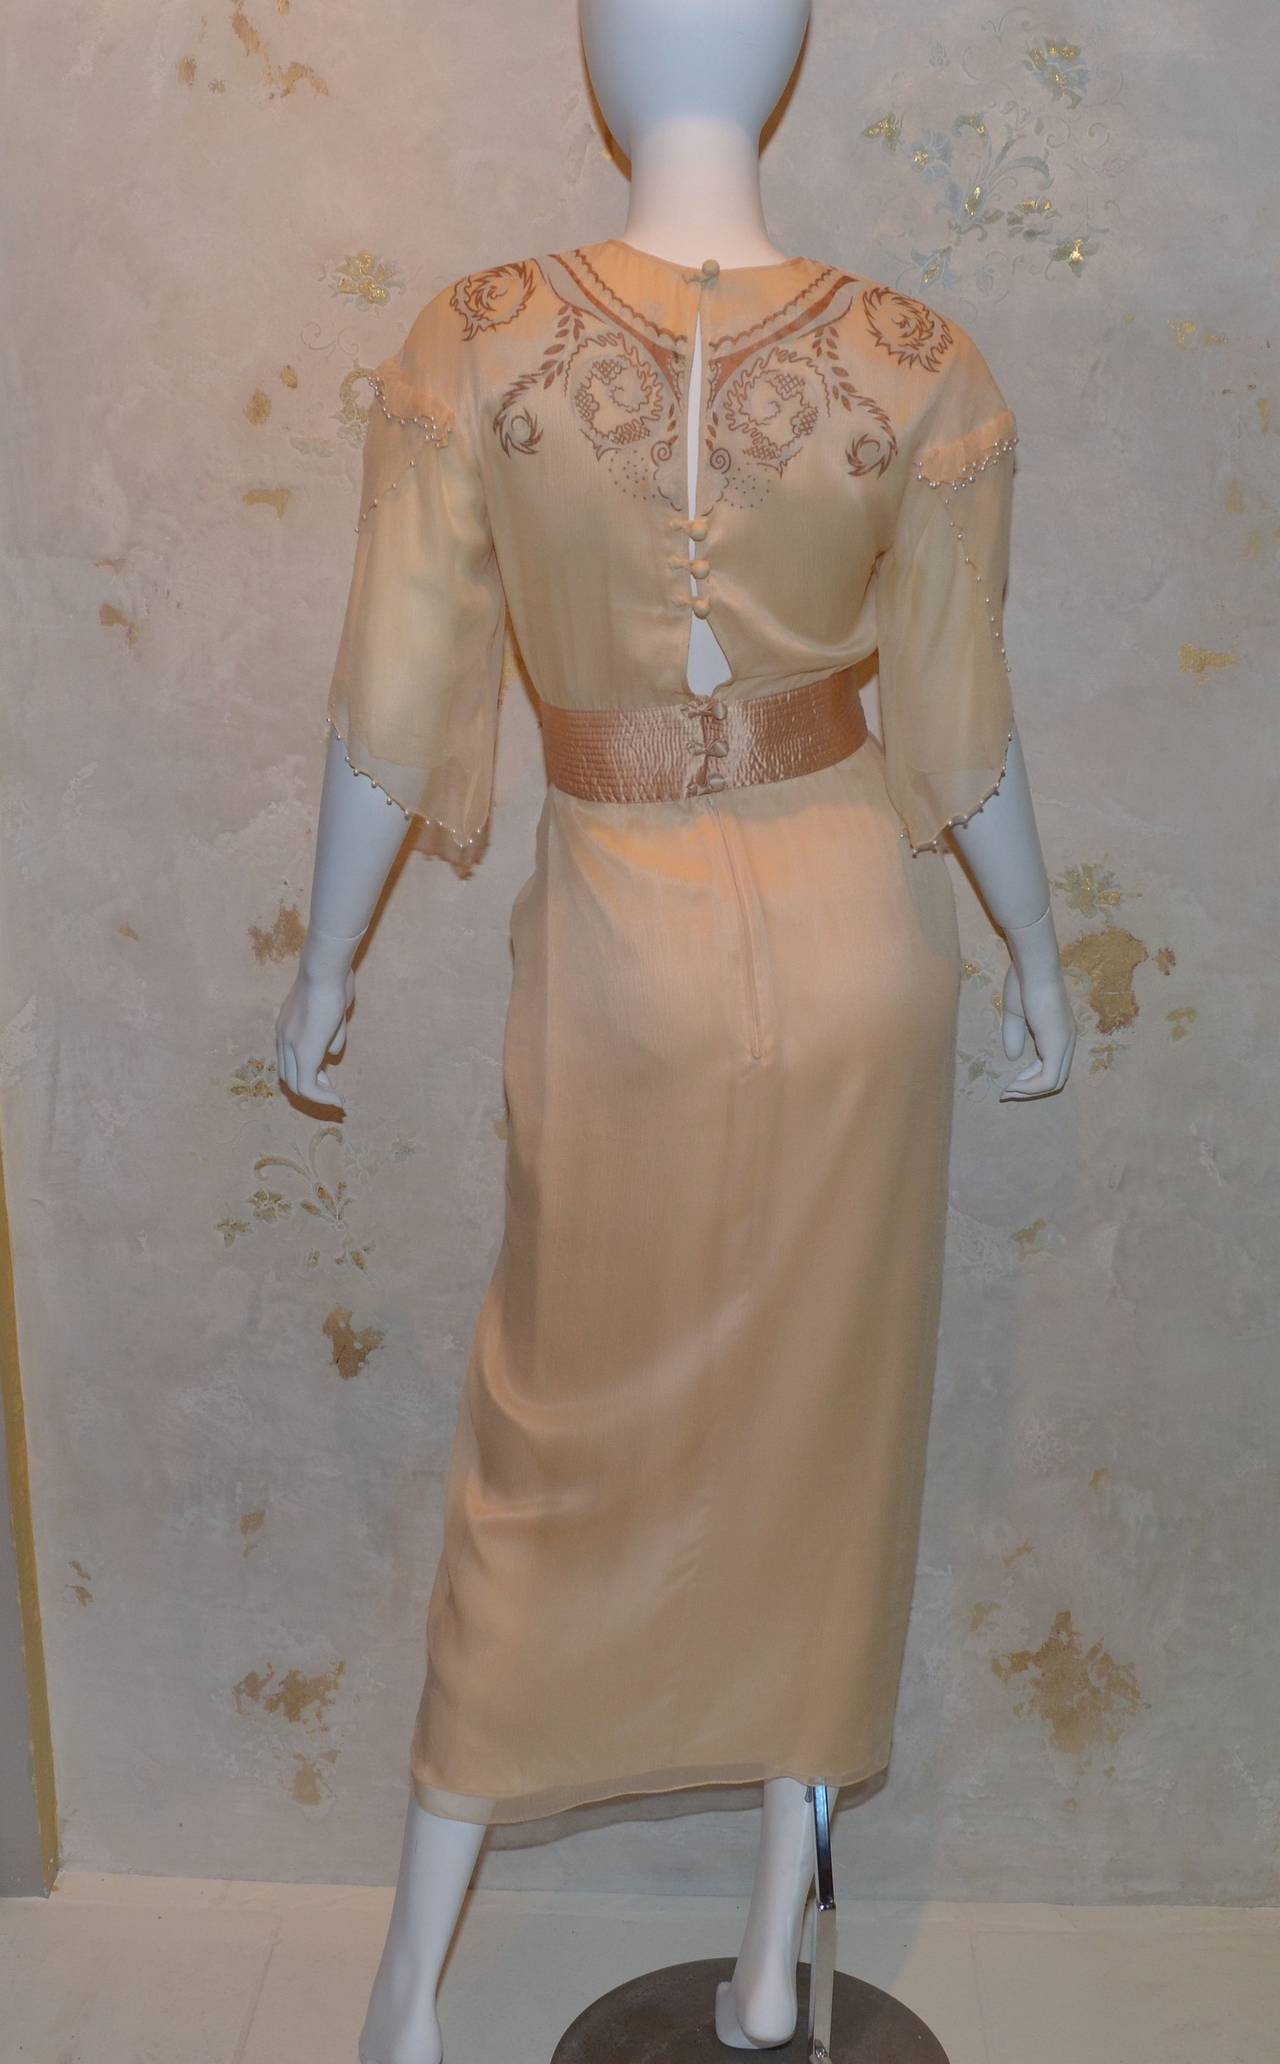 Zandra Rhodes nude chiffon gown, satin waistline, pearl beads, dove gray and copper hand painted design.

Excellent condition.

Zandra Rhodes London Label as well as label with flower that says made in England and Bergdorf Goodman Made in